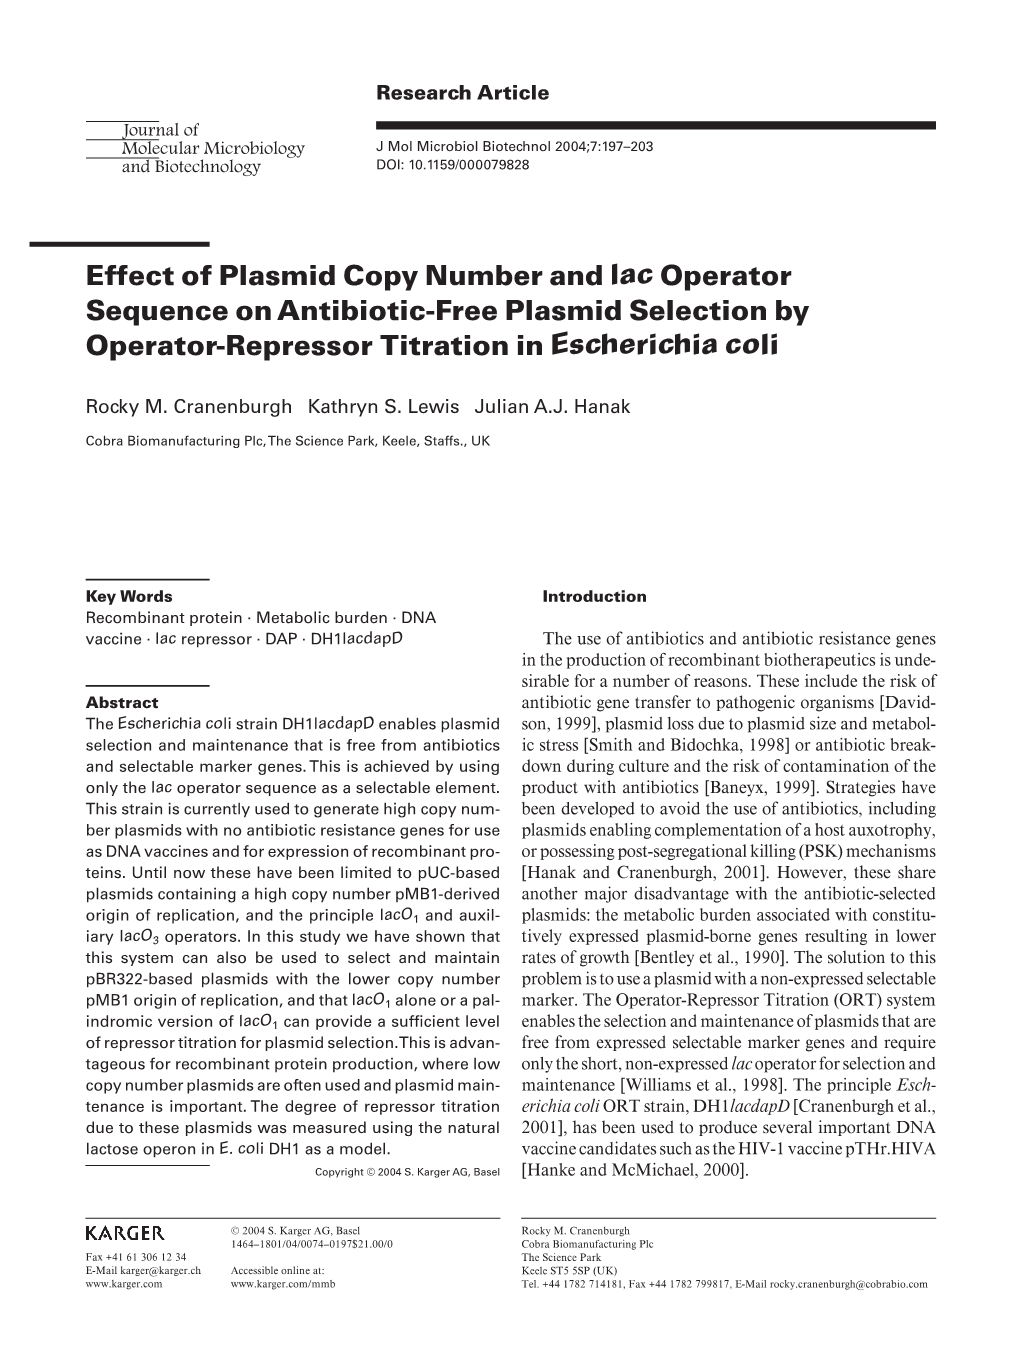 Effect of Plasmid Copy Number and Lac Operator Sequence on Antibiotic-Free Plasmid Selection by Operator-Repressor Titration in Escherichia Coli